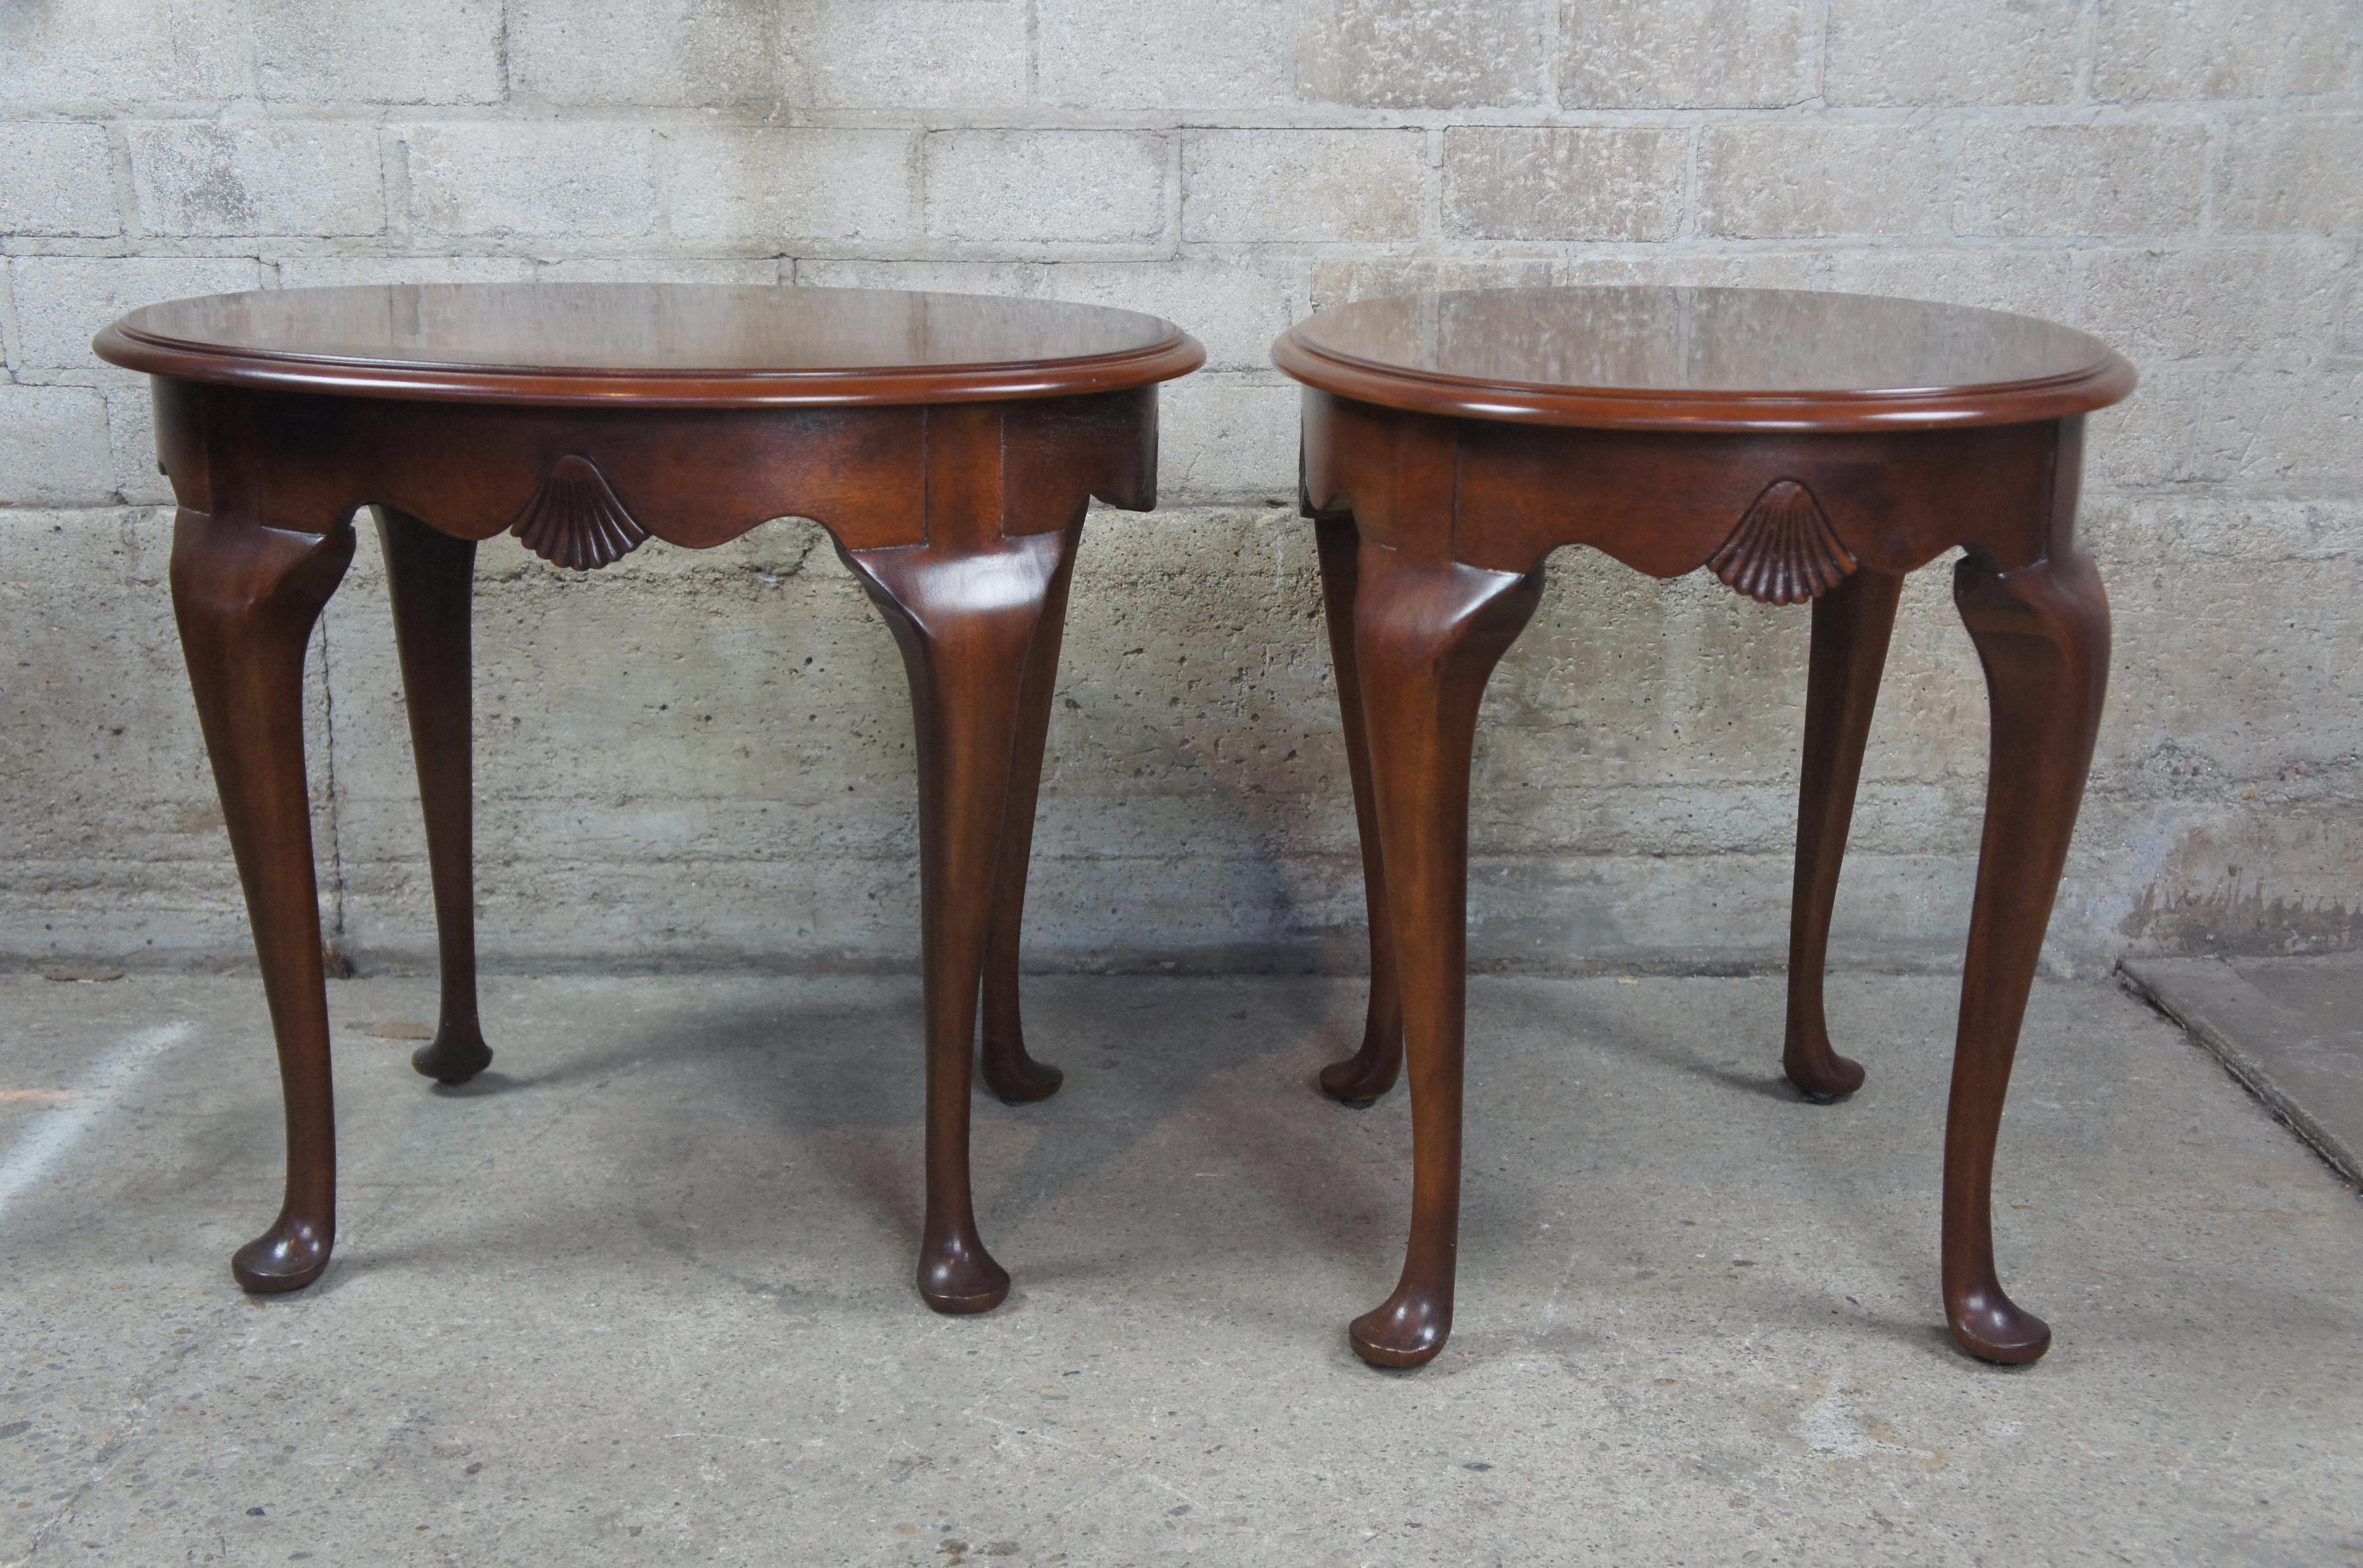 Drexel 18th Century Mahogany Queen Anne Scalloped Oval Accent Tables 138-306 3